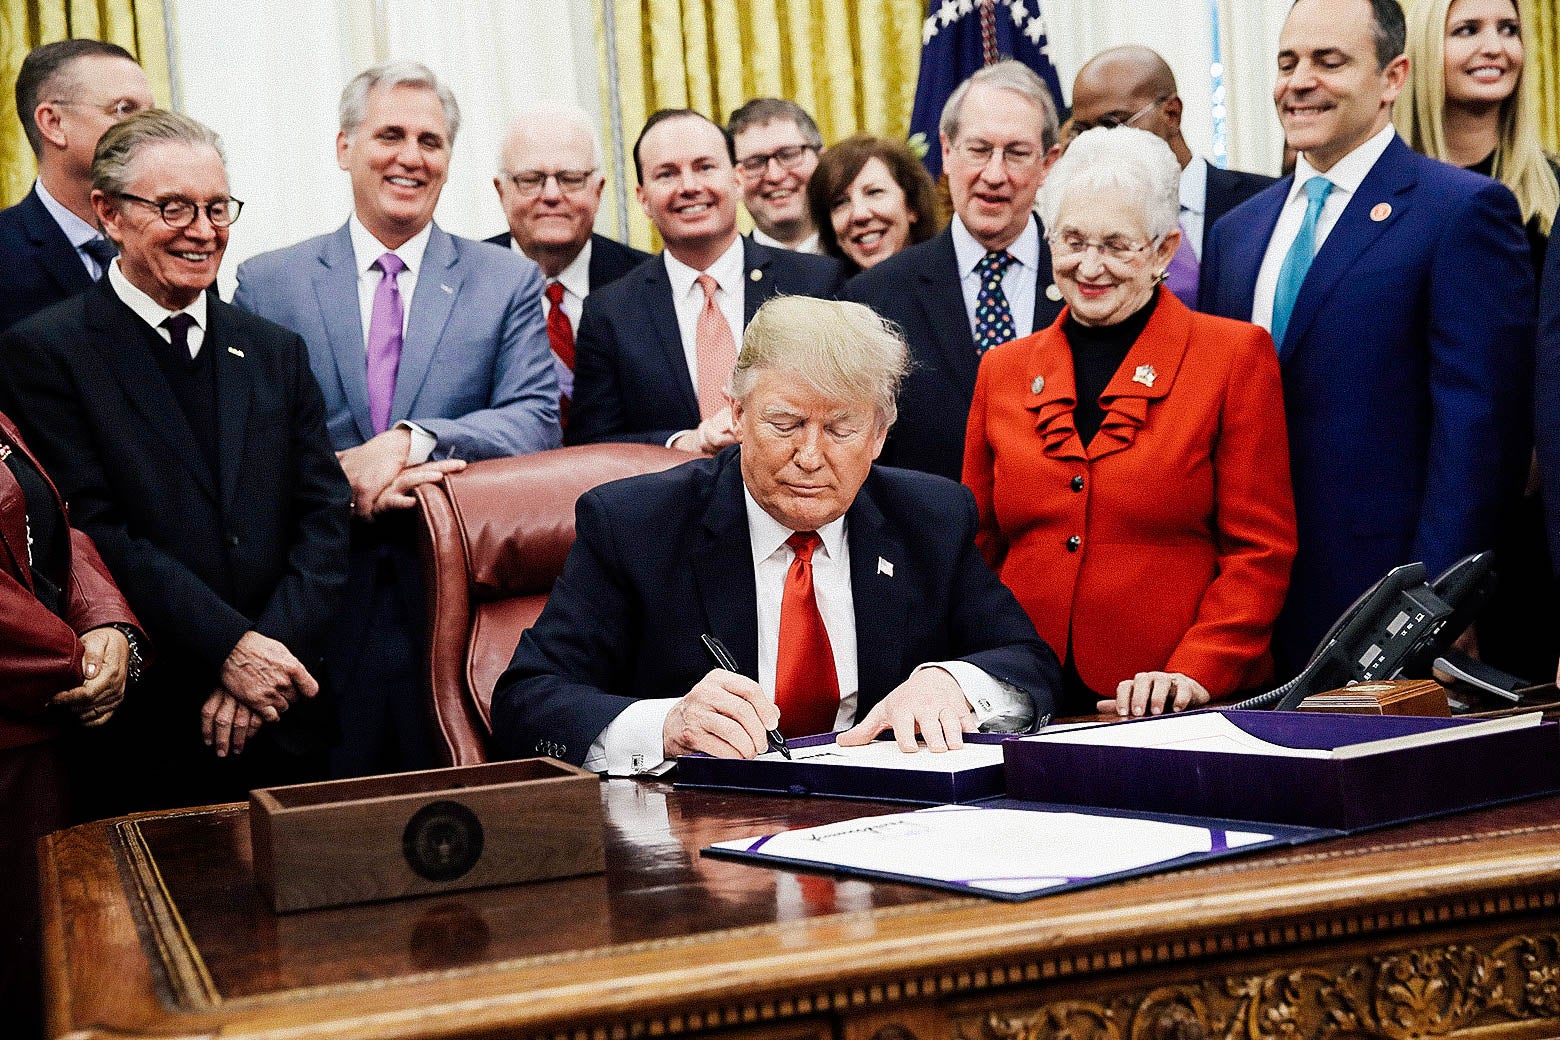 People surround Donald Trump, who's seated at his desk in the Oval Office signing a document.